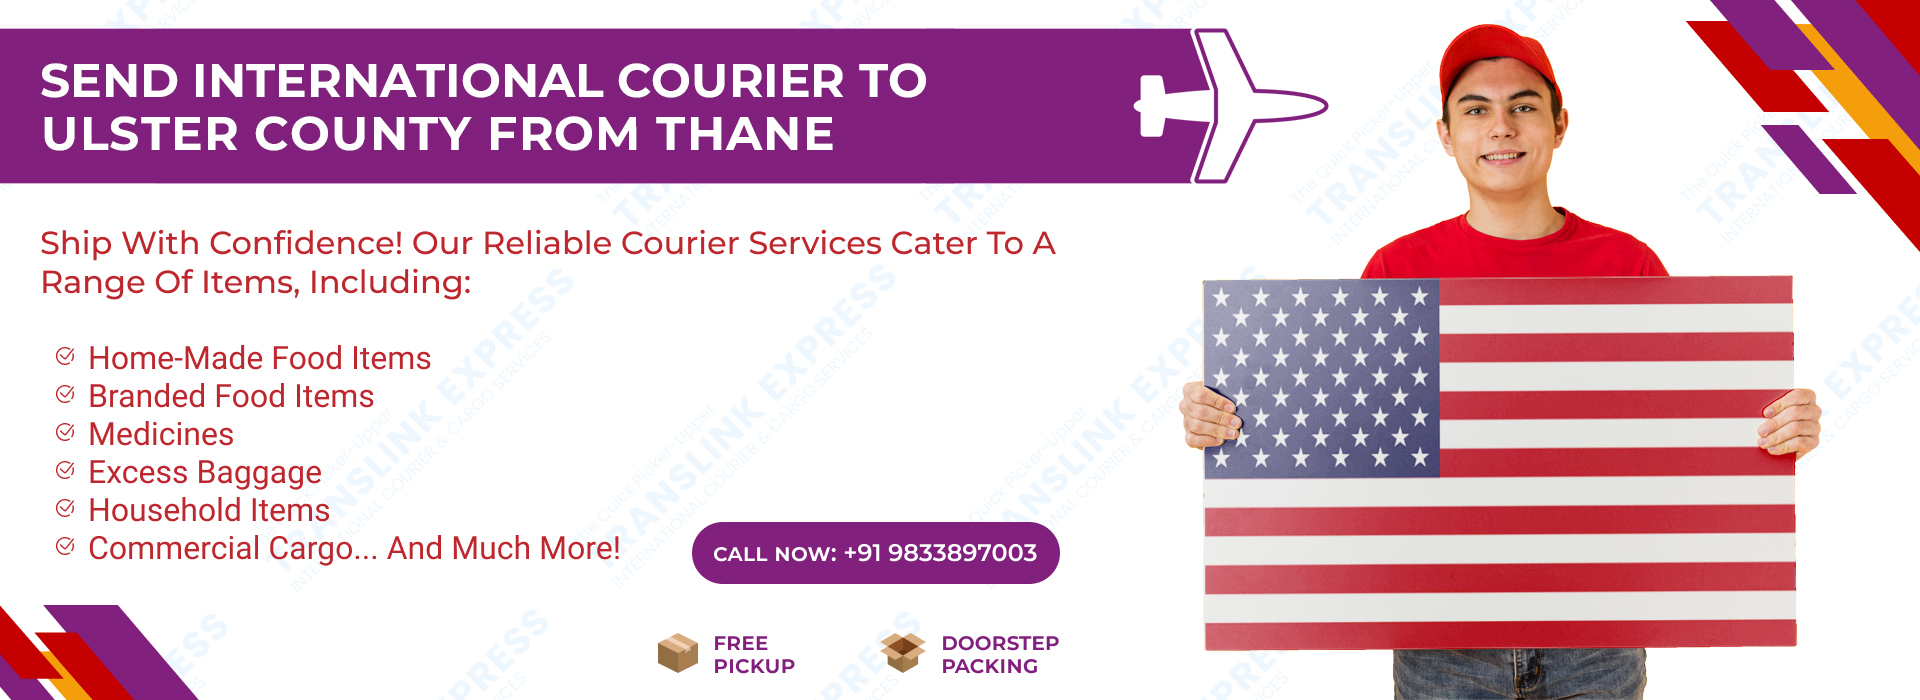 Courier to Ulster County From Thane